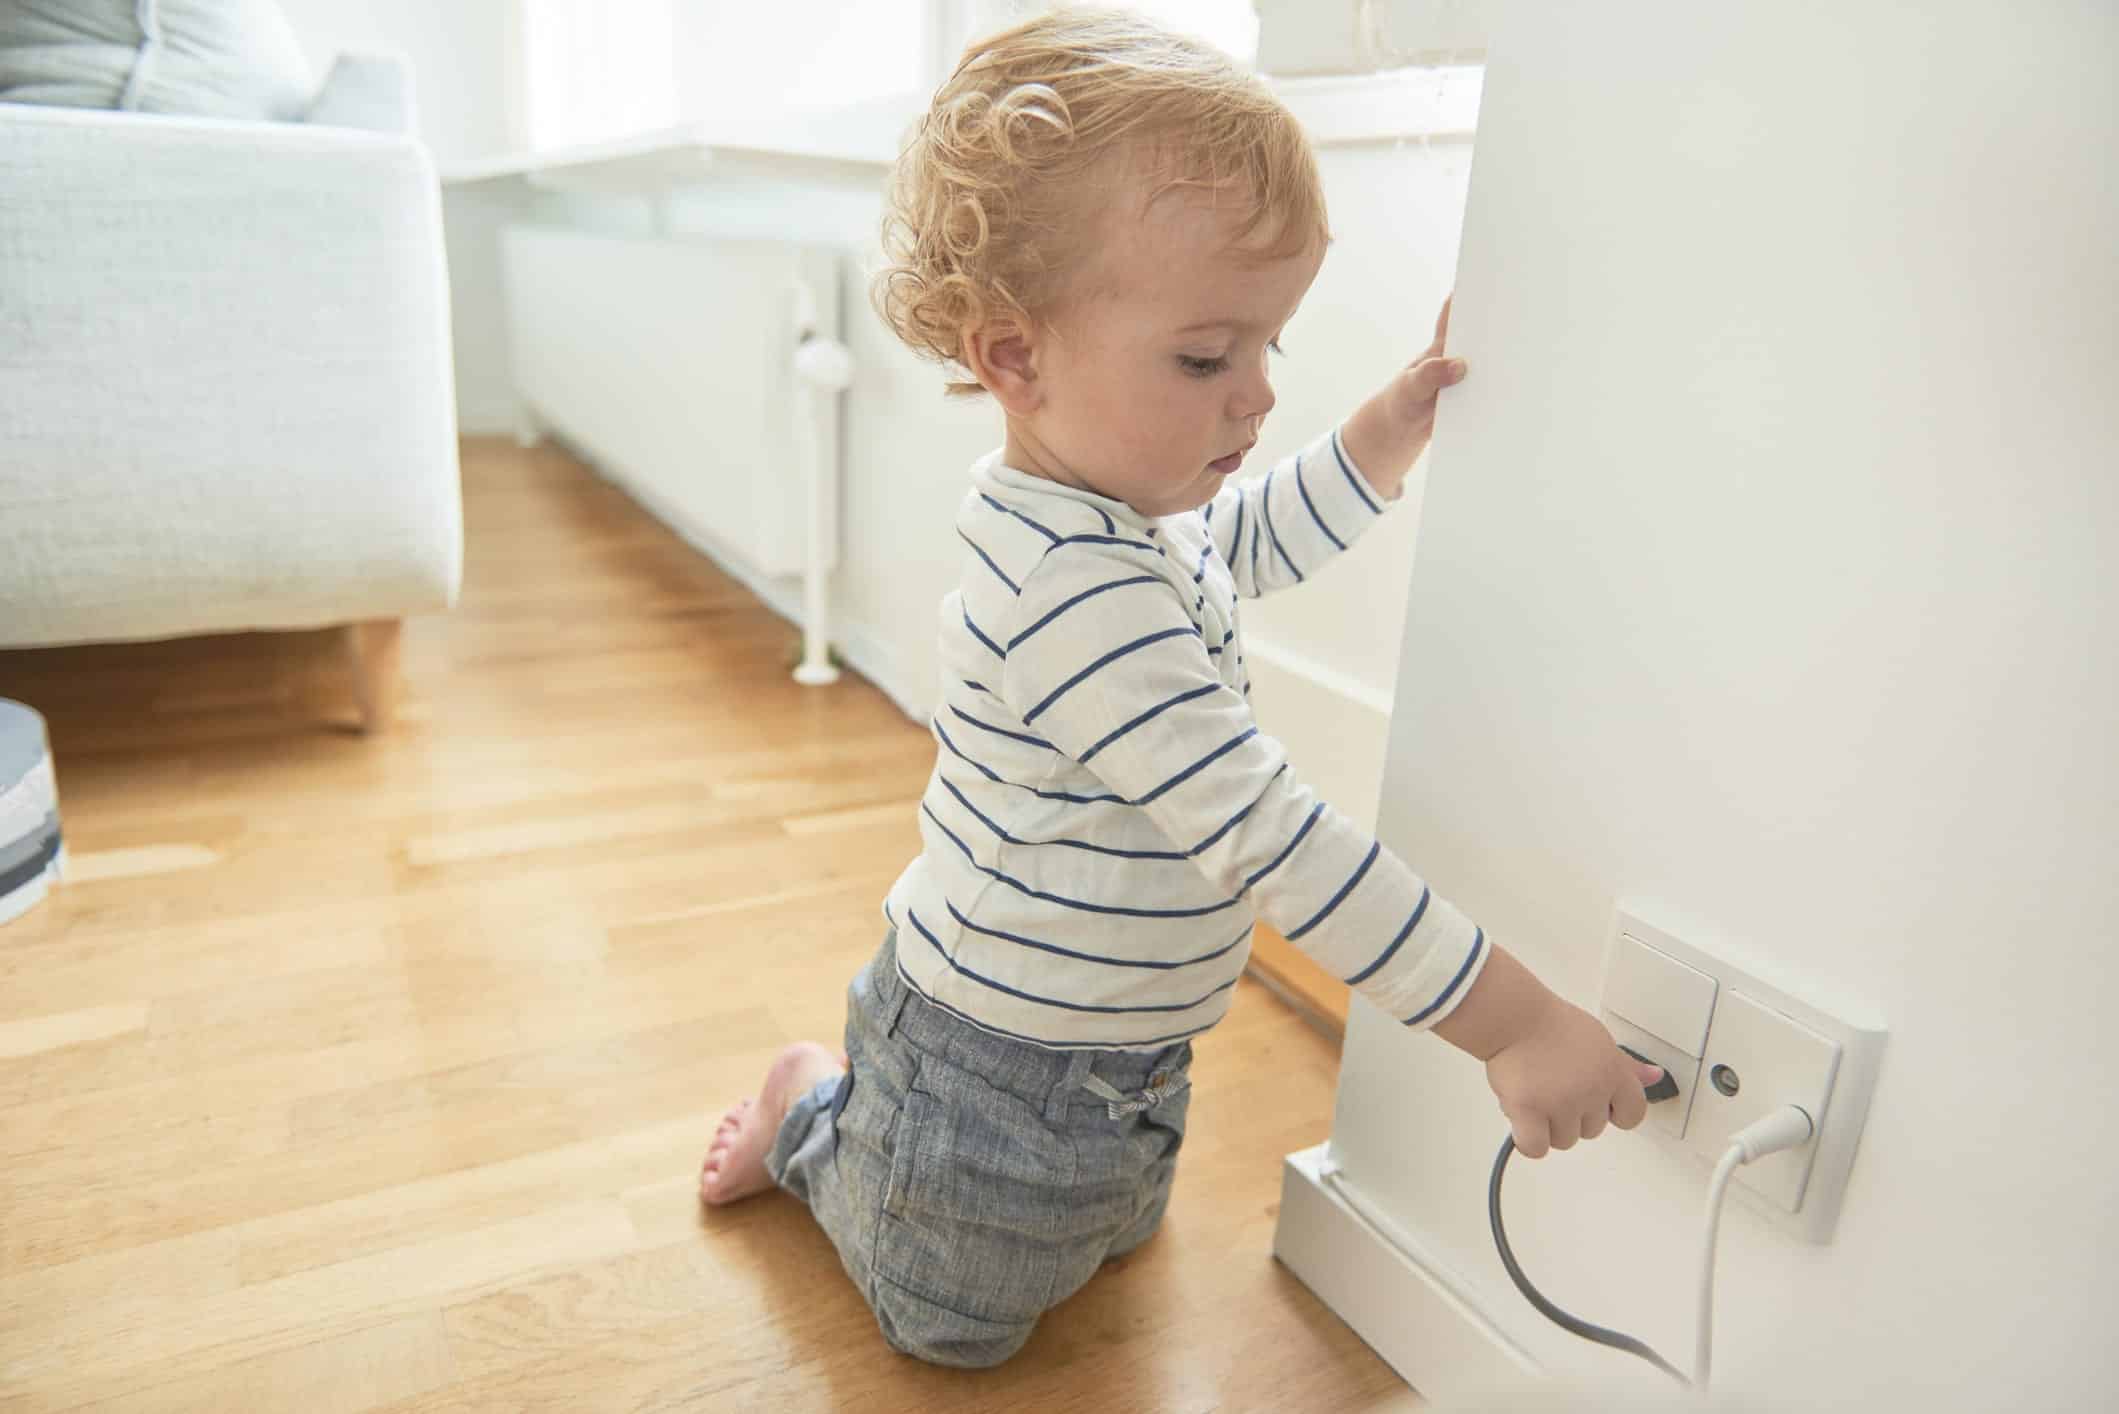 his is especially important when children are involved, so the first step in keeping your children safe is to remember the dangers of electricity. Here are our electrical safety tips for children.